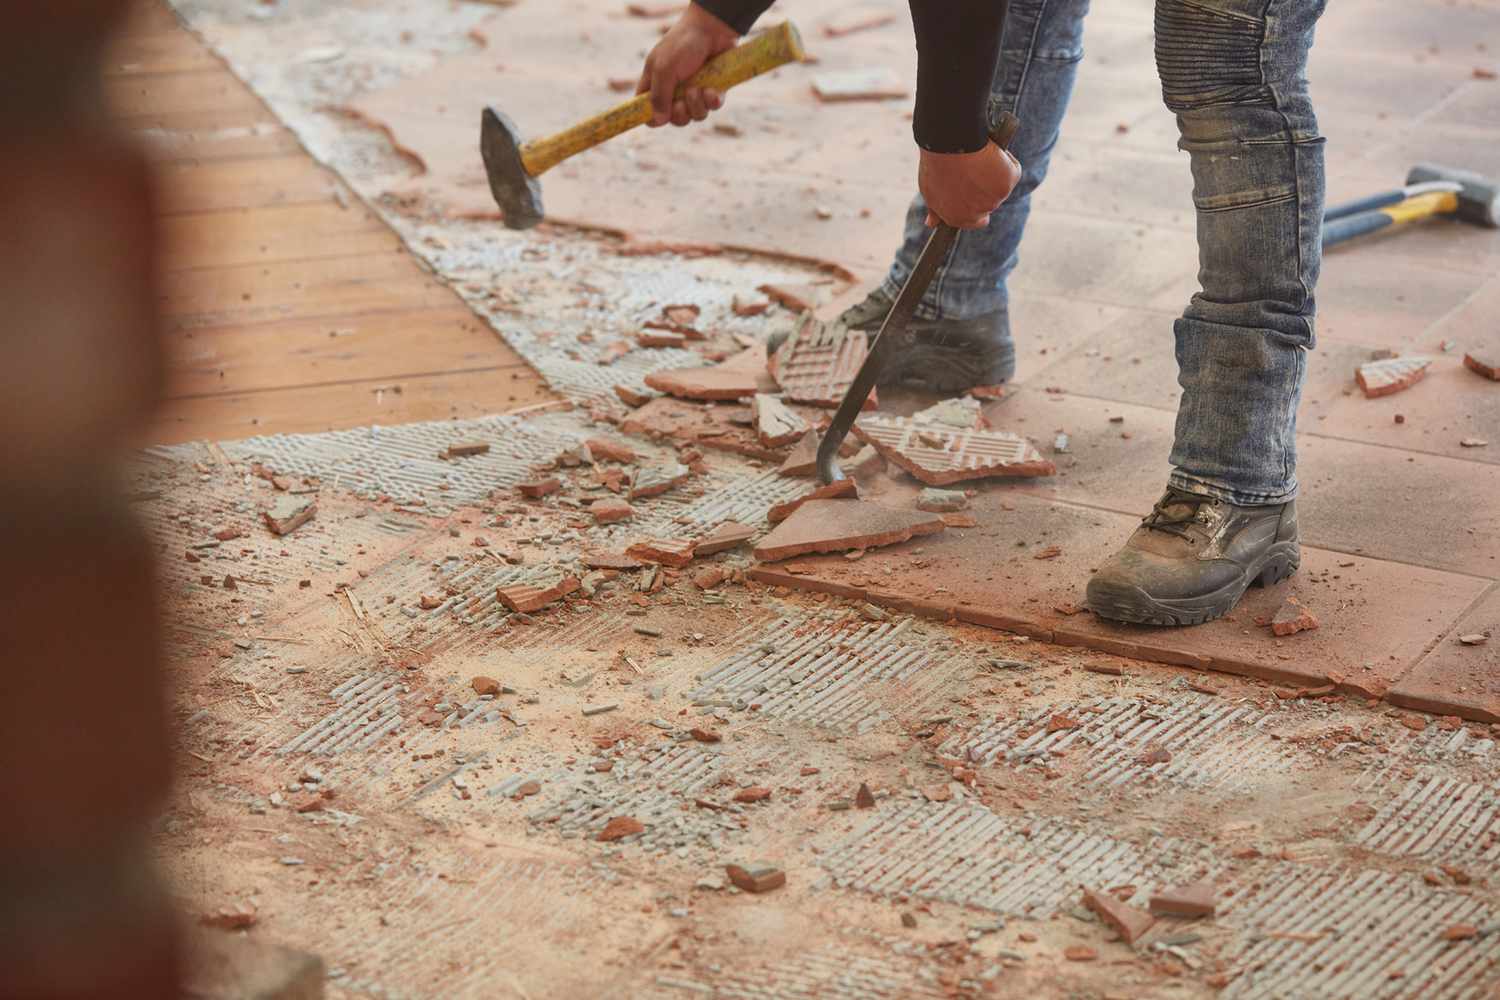 How To Remove Ceramic Tile Adhesive From Concrete Floor